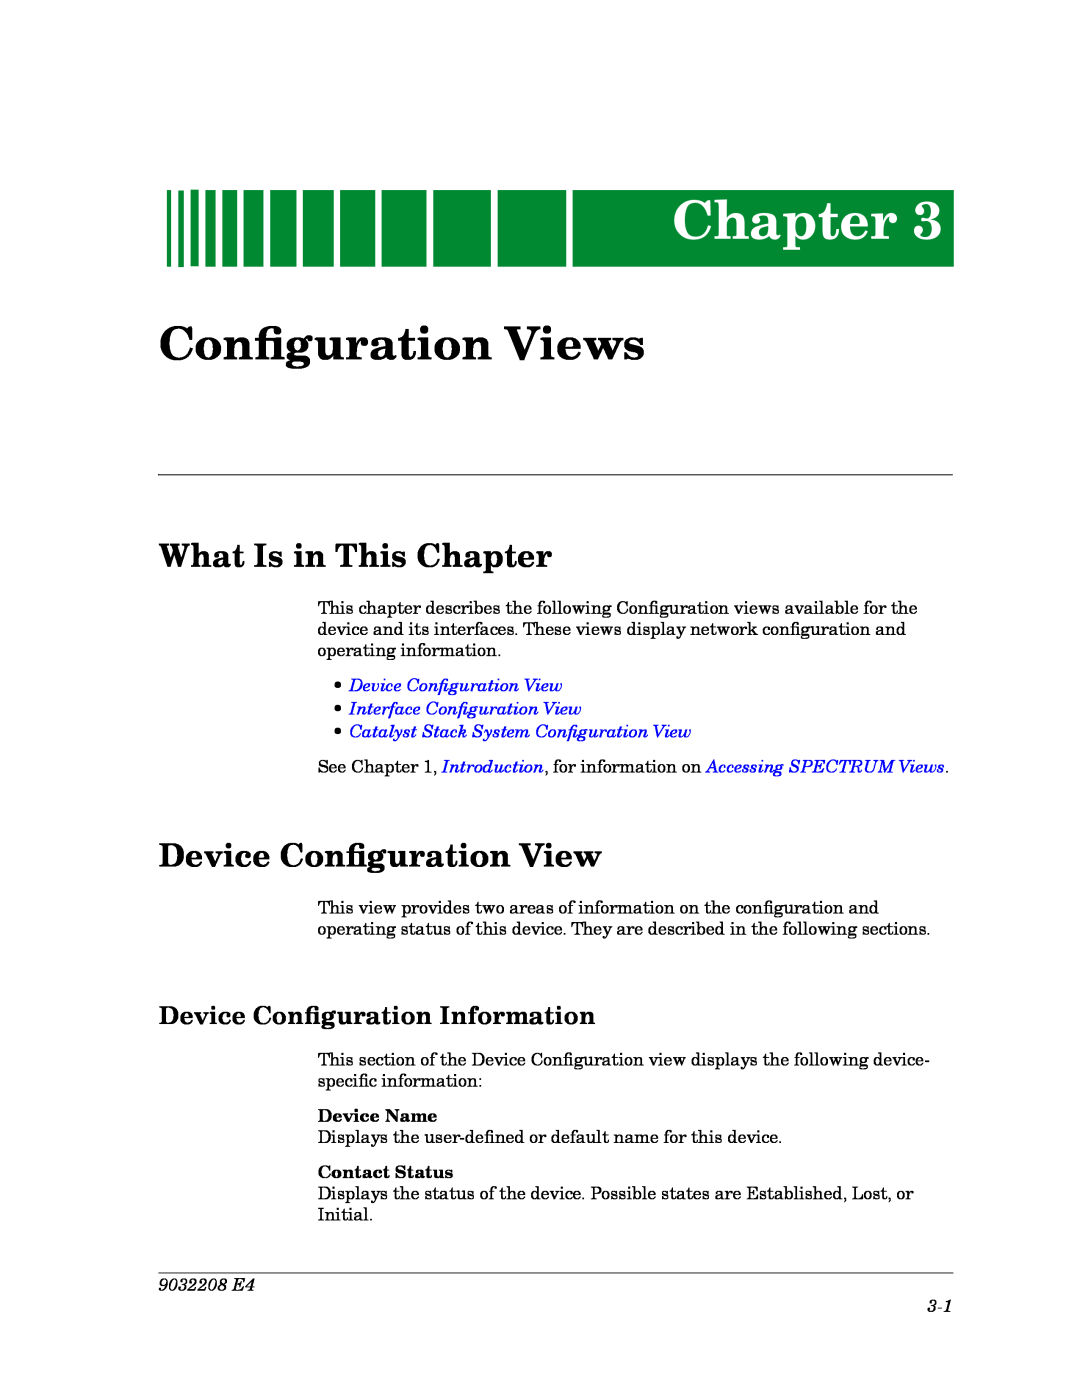 Cabletron Systems 5000, 5500 ConÞguration Views, Device ConÞguration View, Device ConÞguration Information, Device Name 